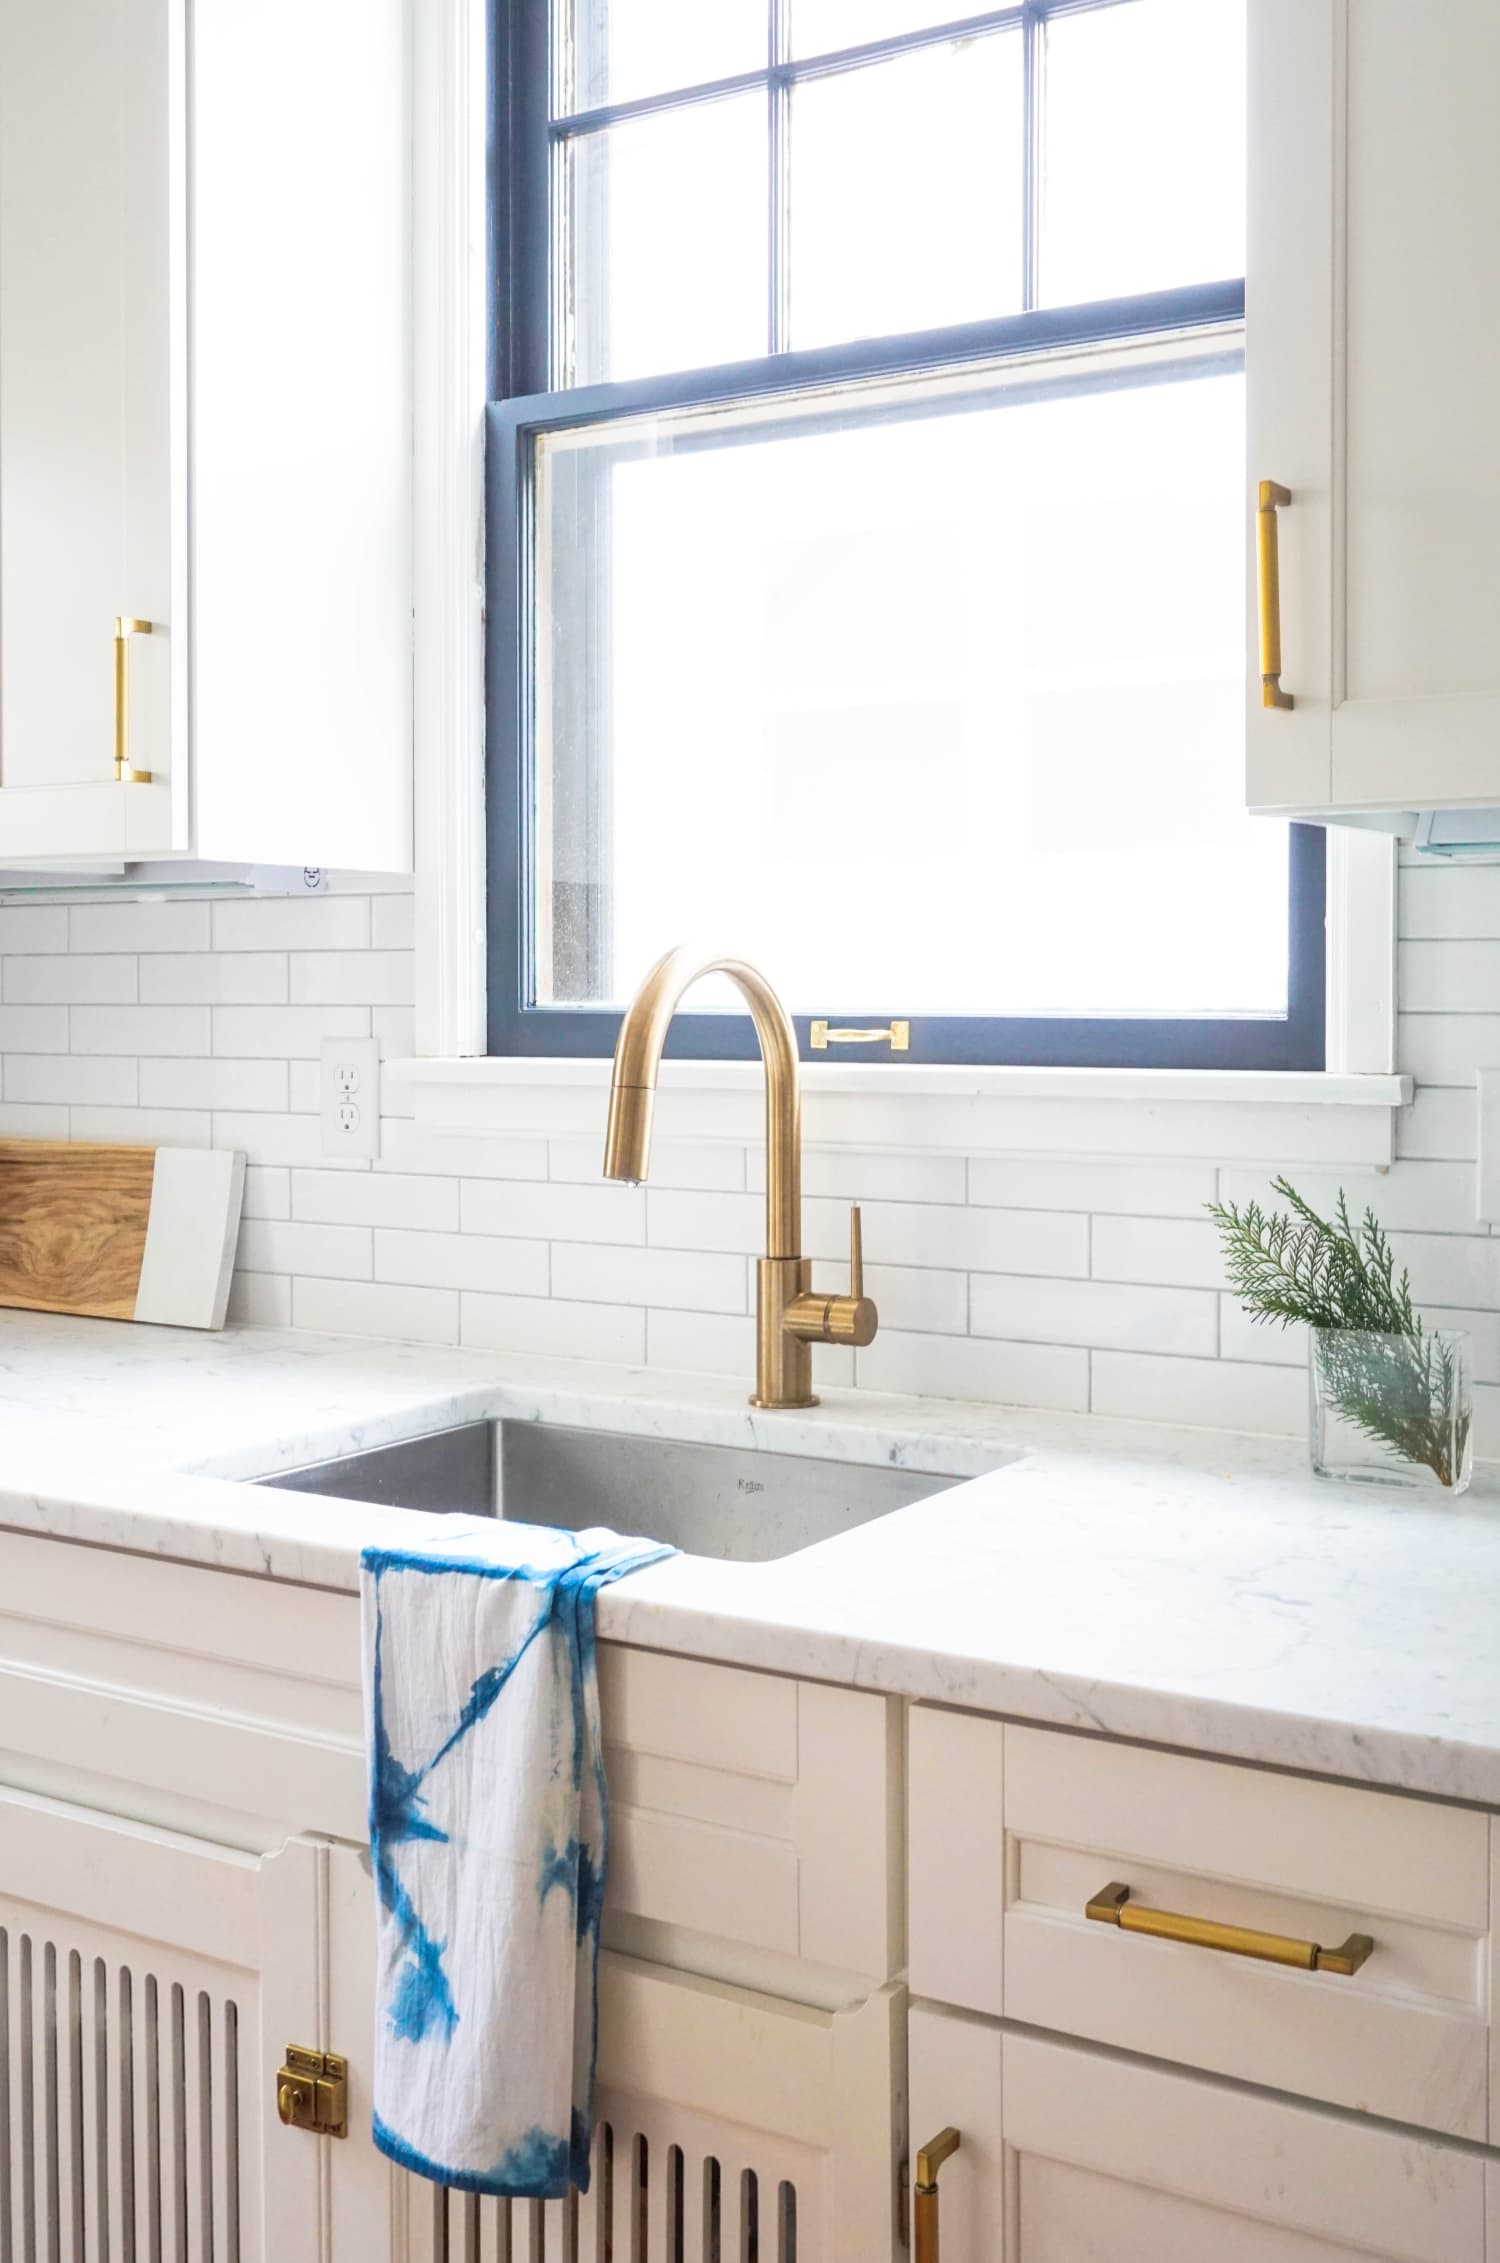 Style Boosts: Ideas for Upgrading a Simple Kitchen Sink Window